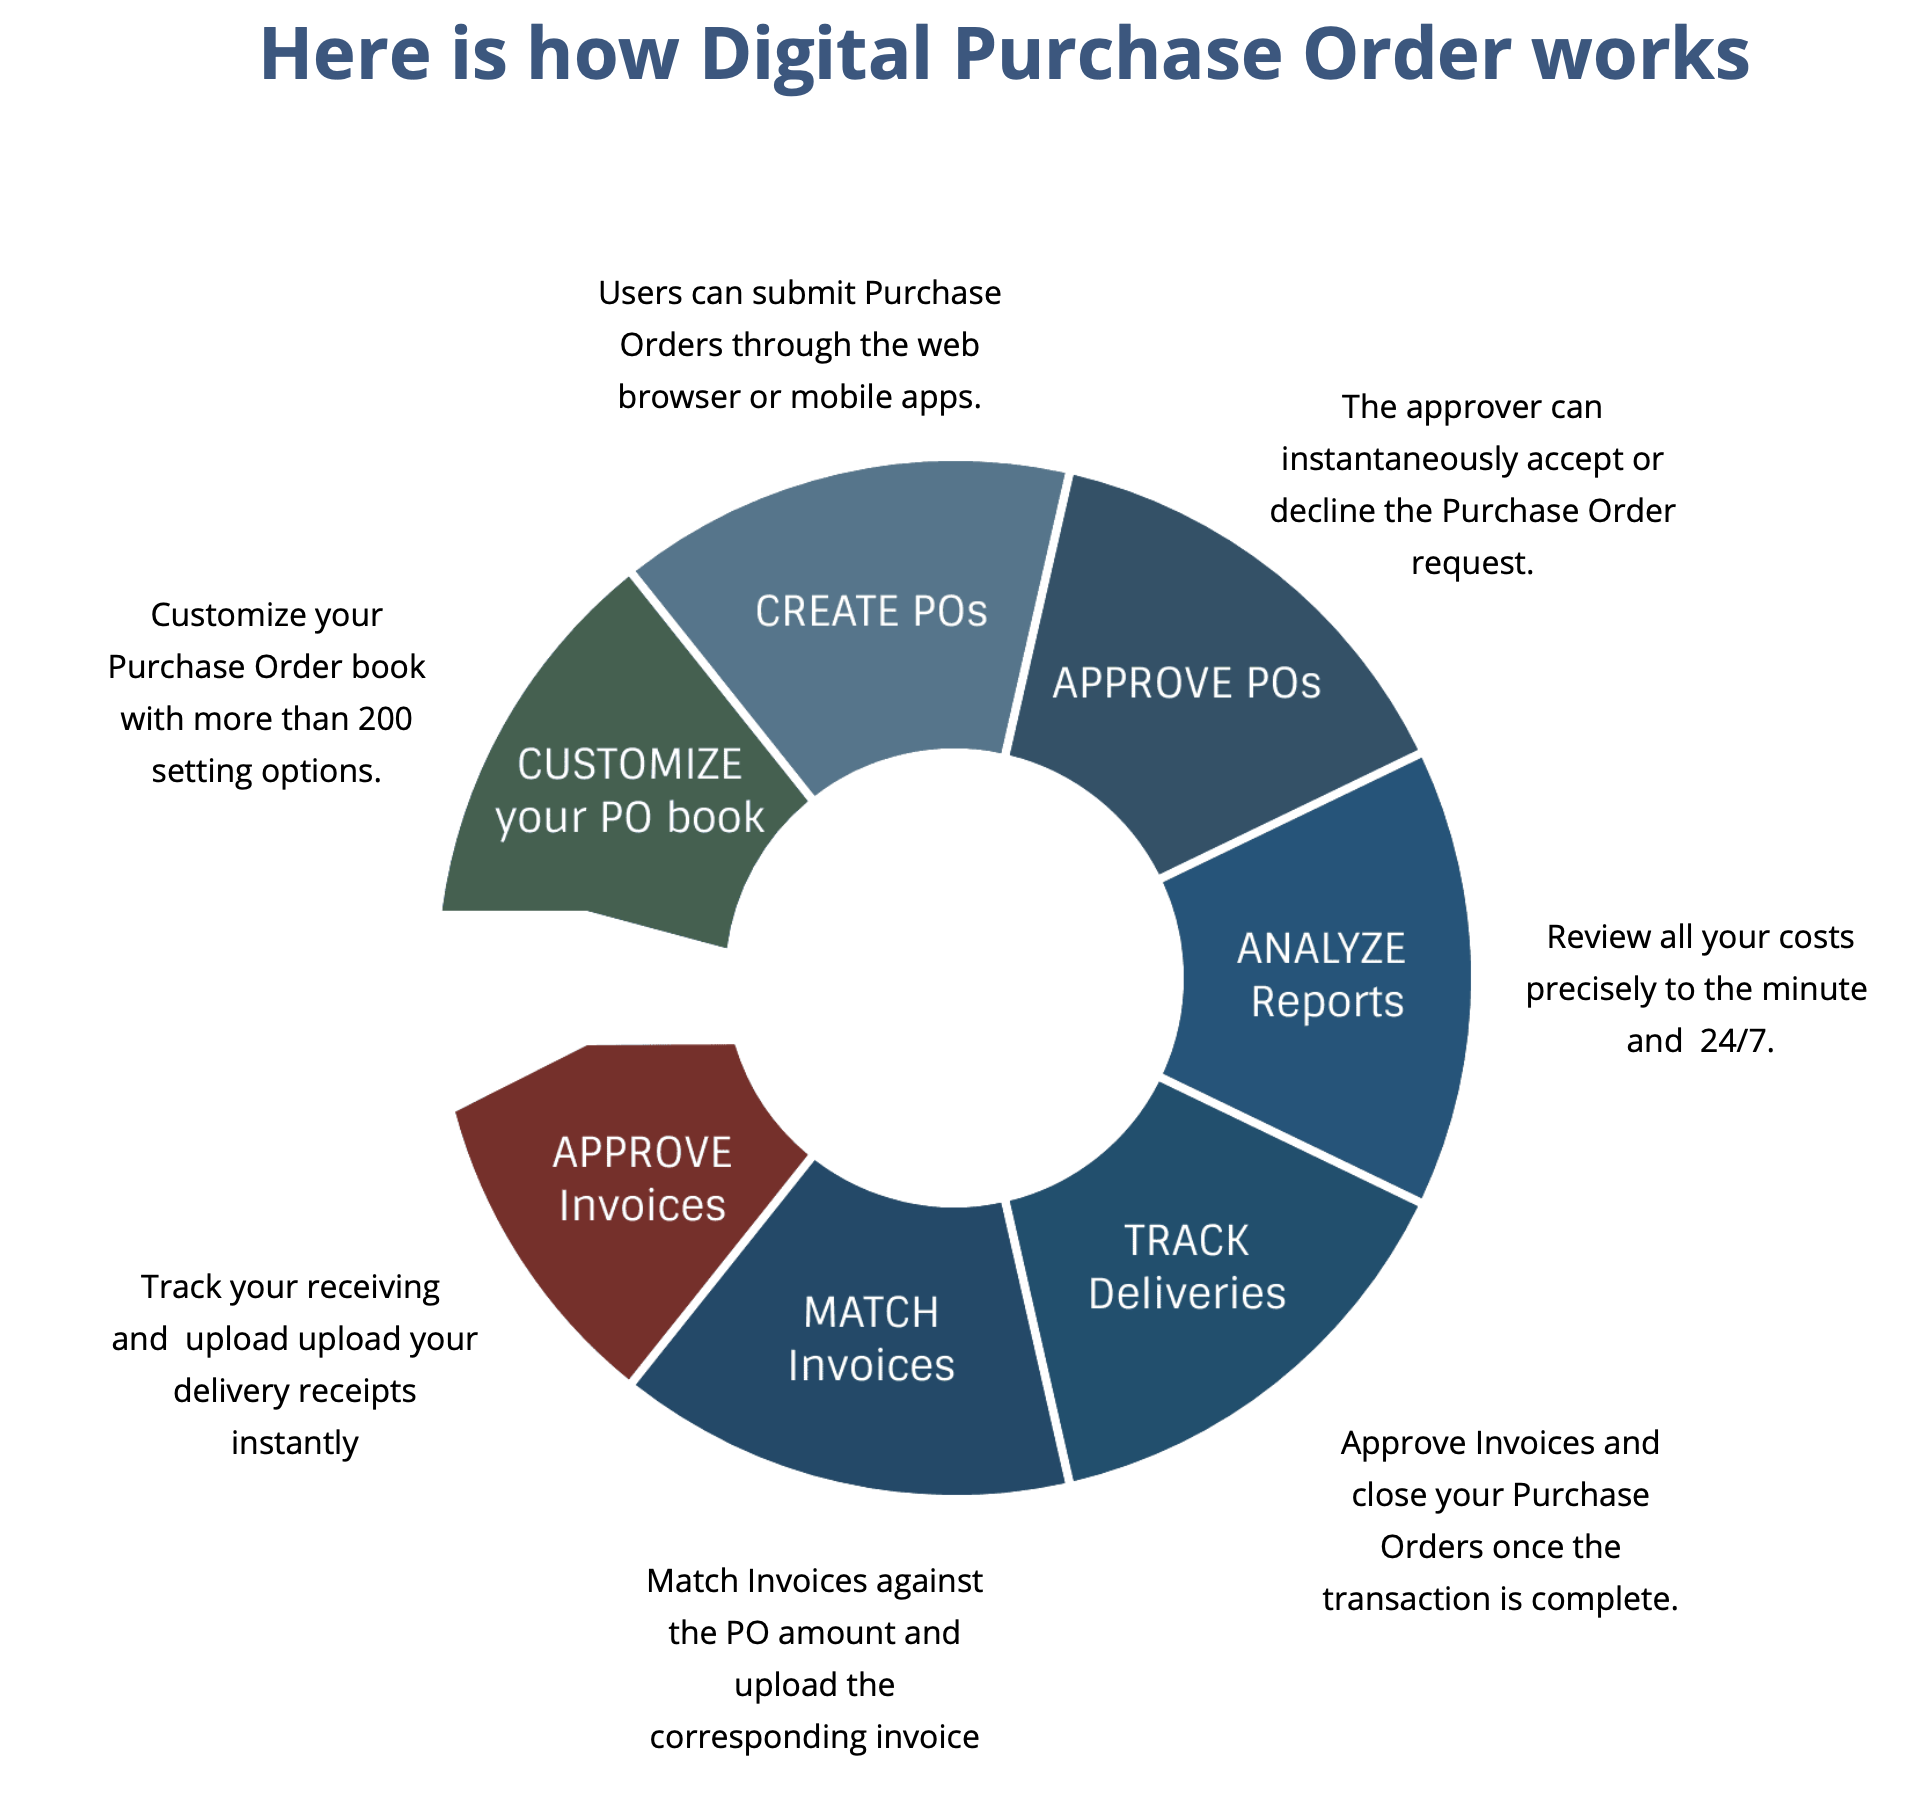 Digital Purchase Order 08e20f9f-bcac-4a59-8f0f-bf9c7307b82d.png